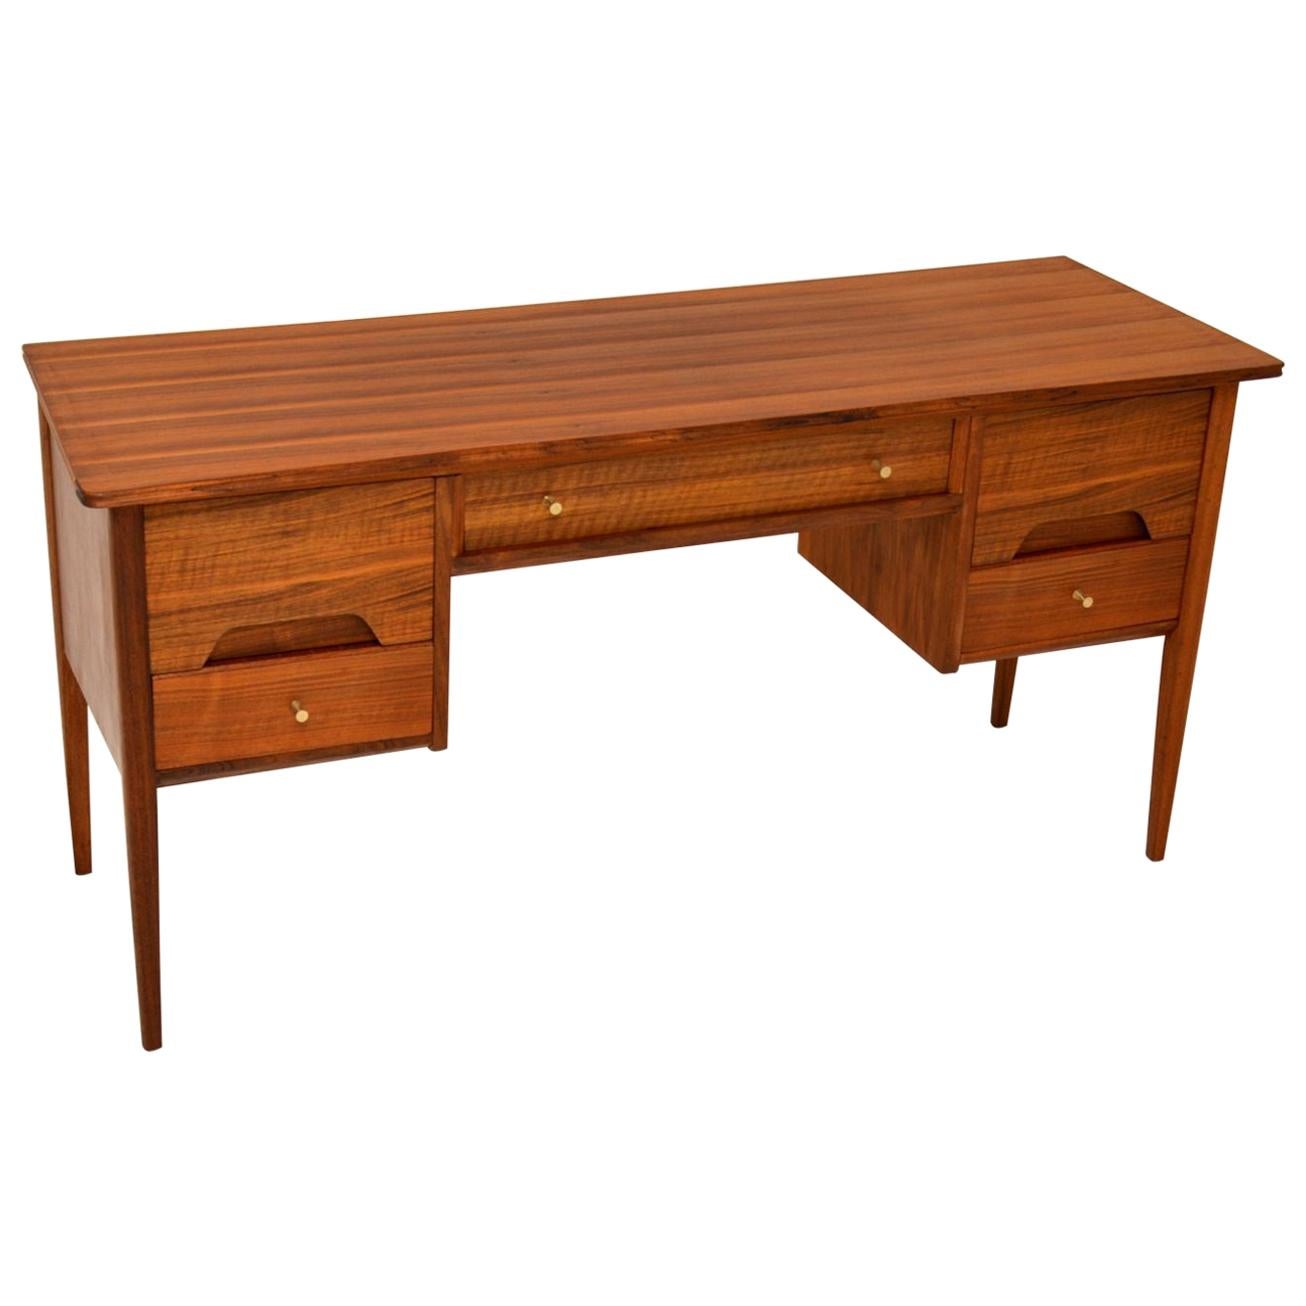 Vintage Walnut Desk by A. Younger, c. 1960’s